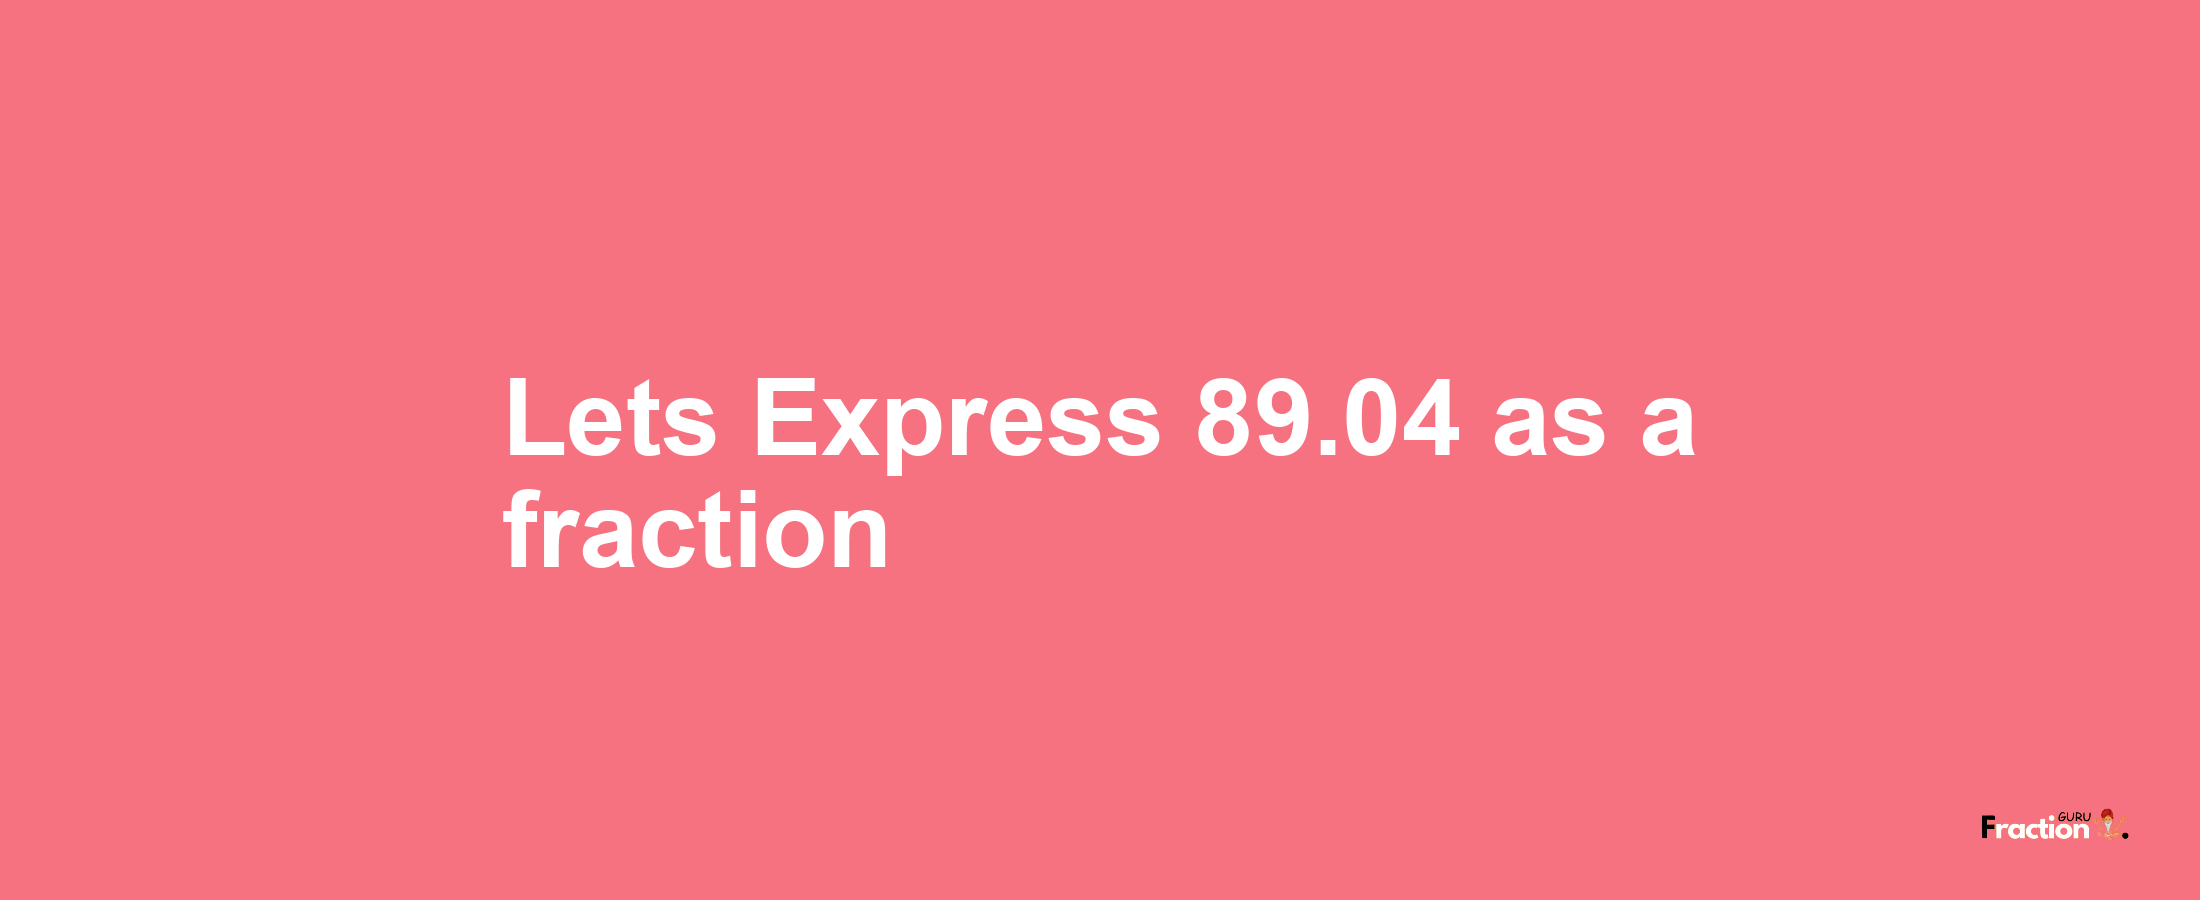 Lets Express 89.04 as afraction